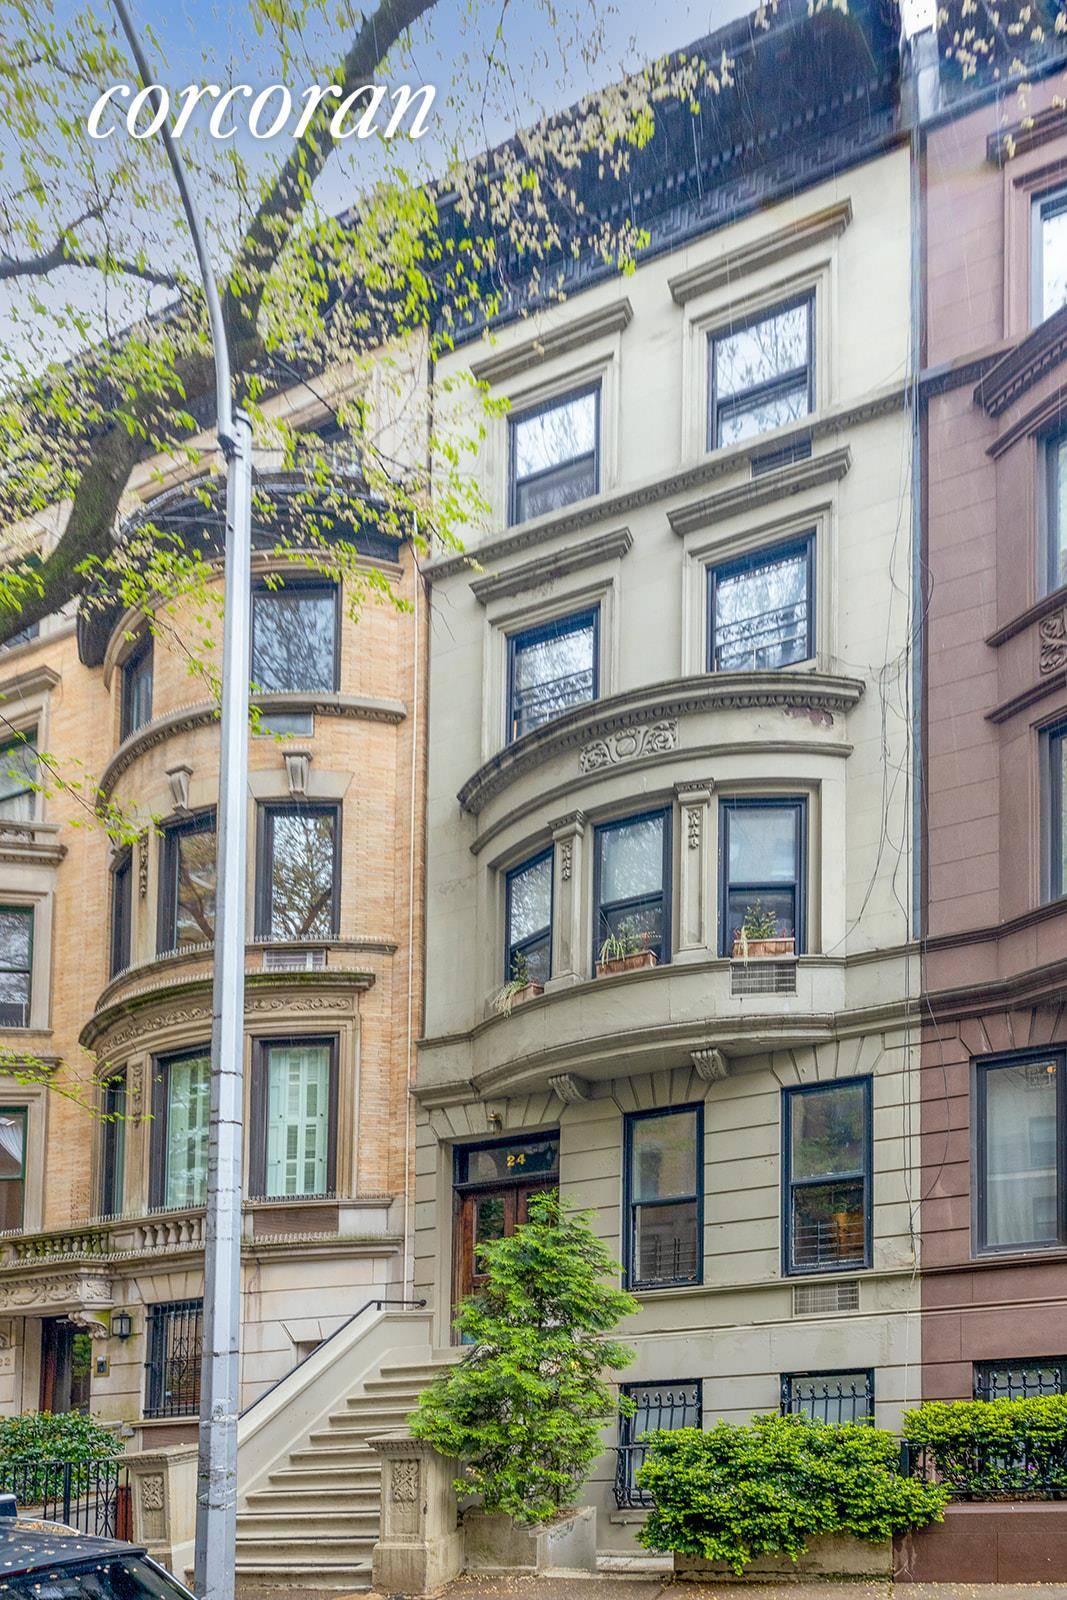 24 West 68th Street is a 19 foot wide Renaissance Revival townhouse built circa 1896 by famed architect George F.